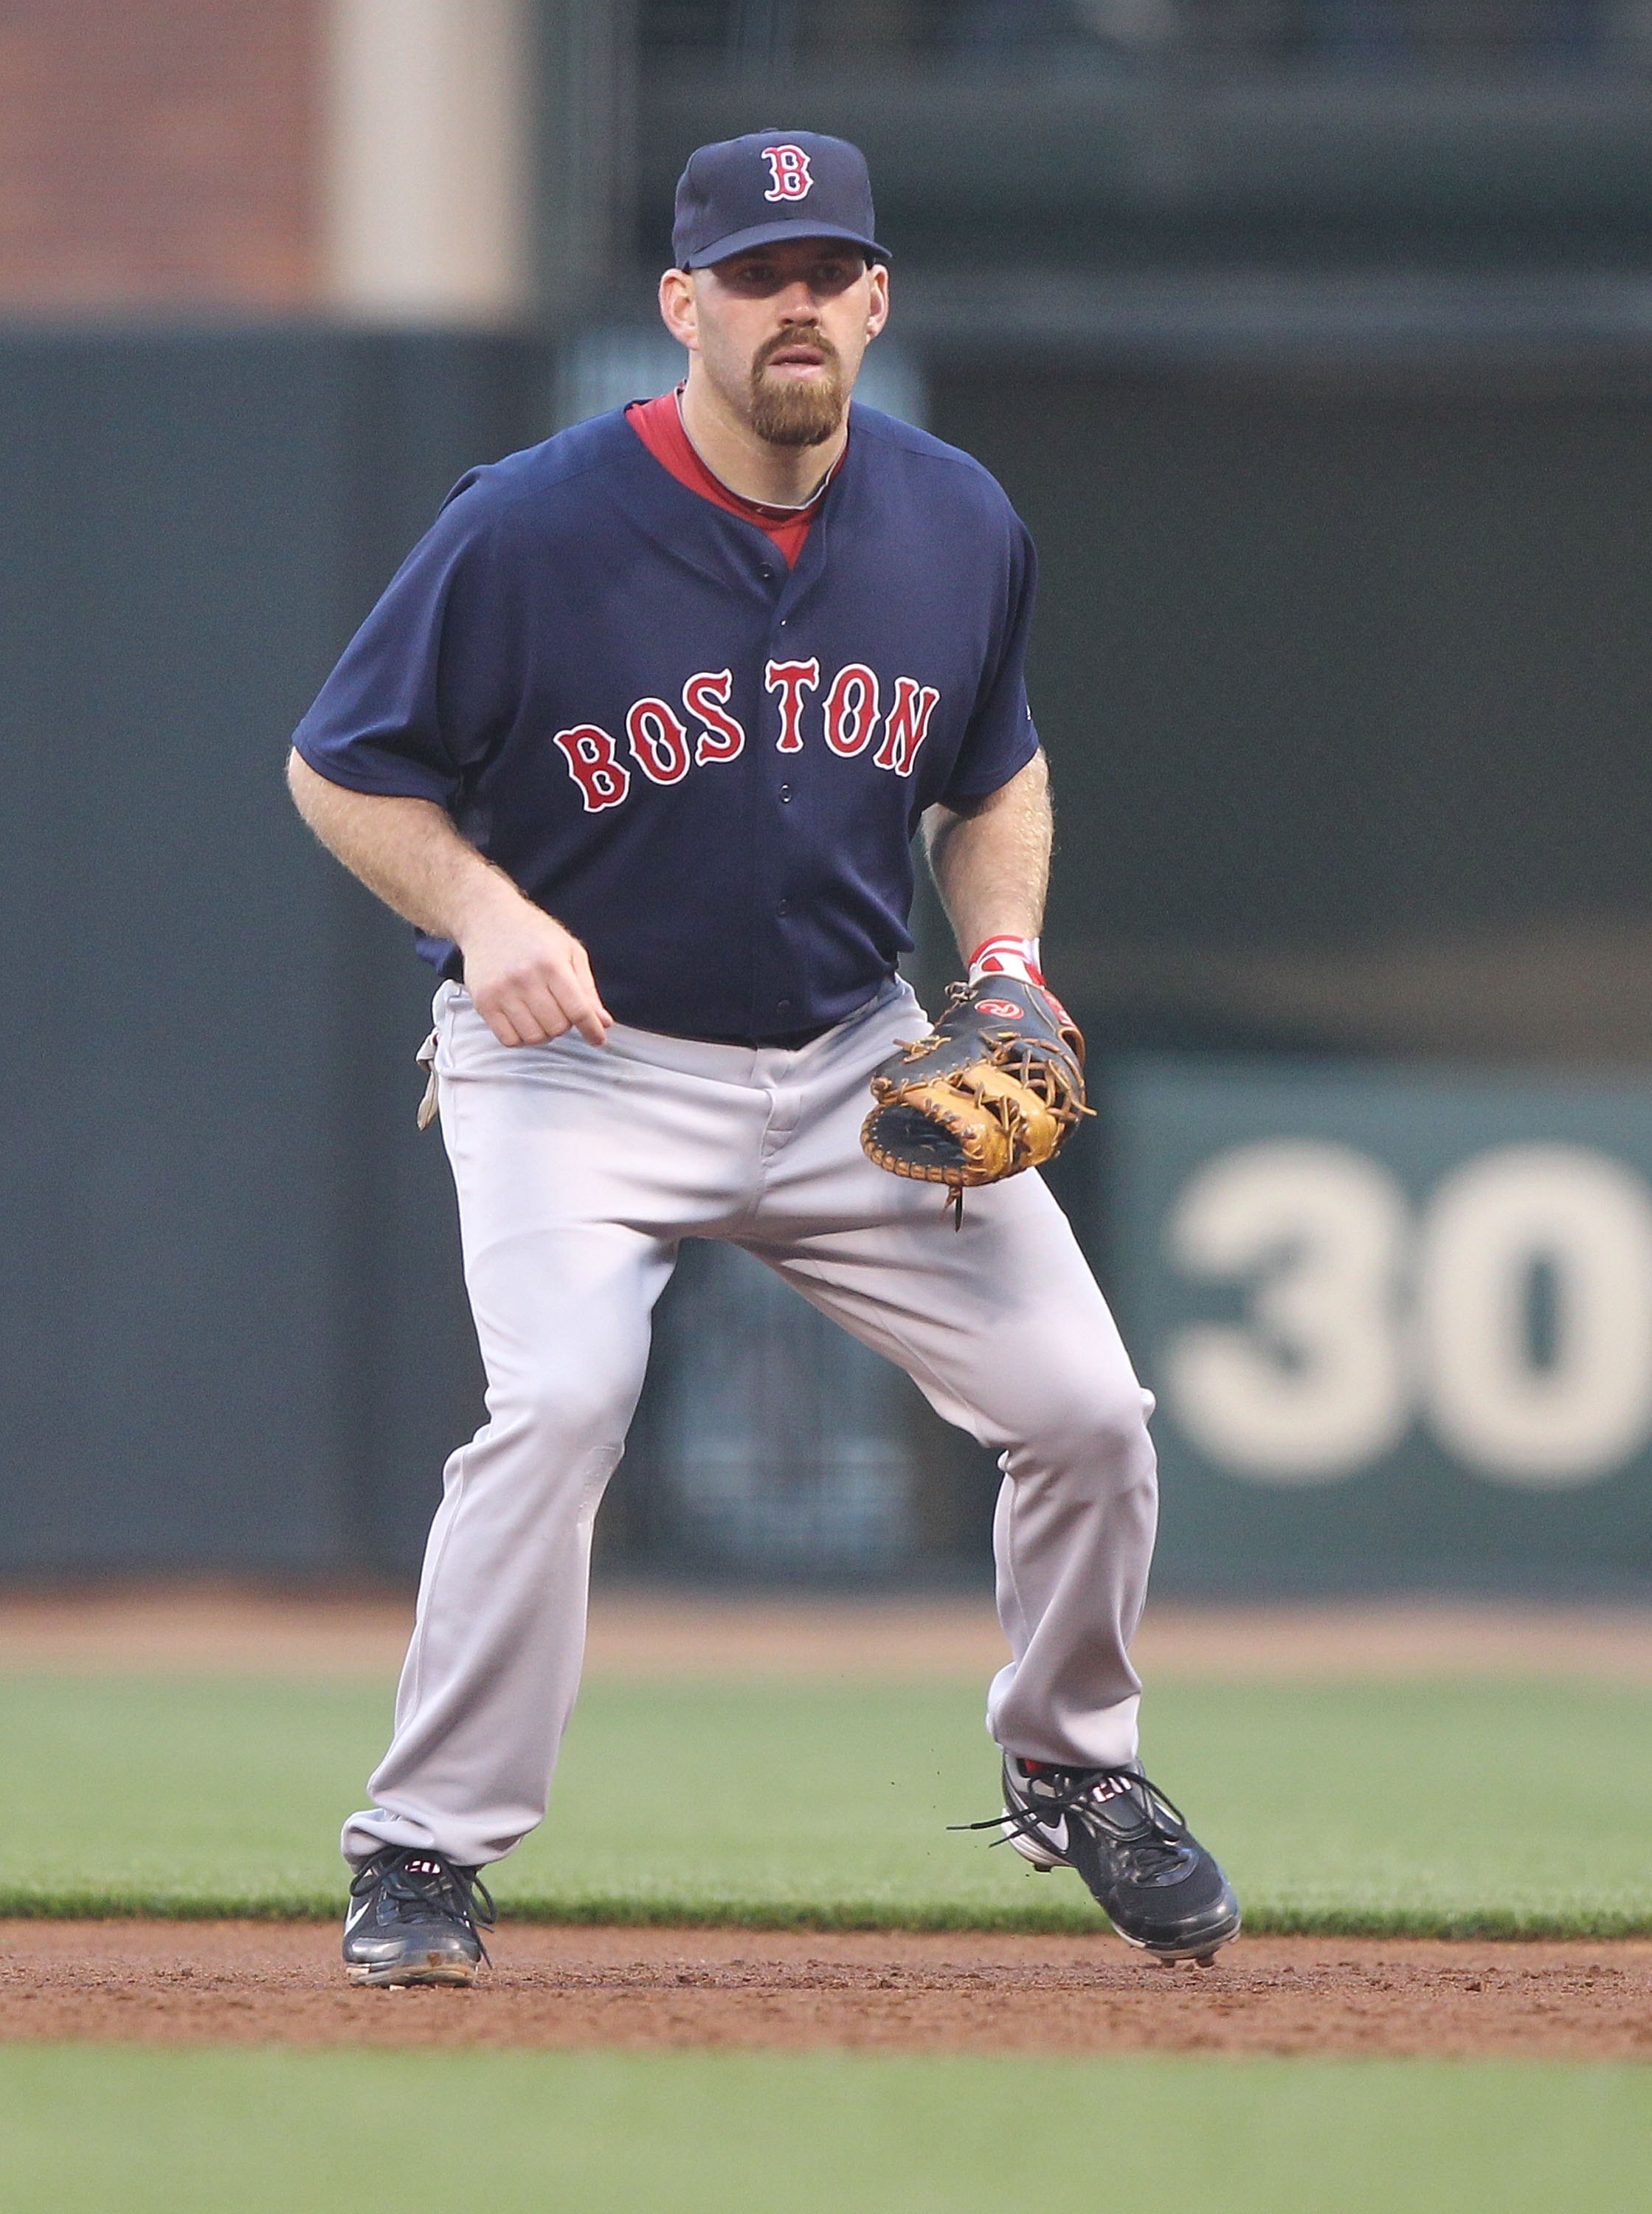 Kevin Youkilis poised to move past controversy - The Boston Globe